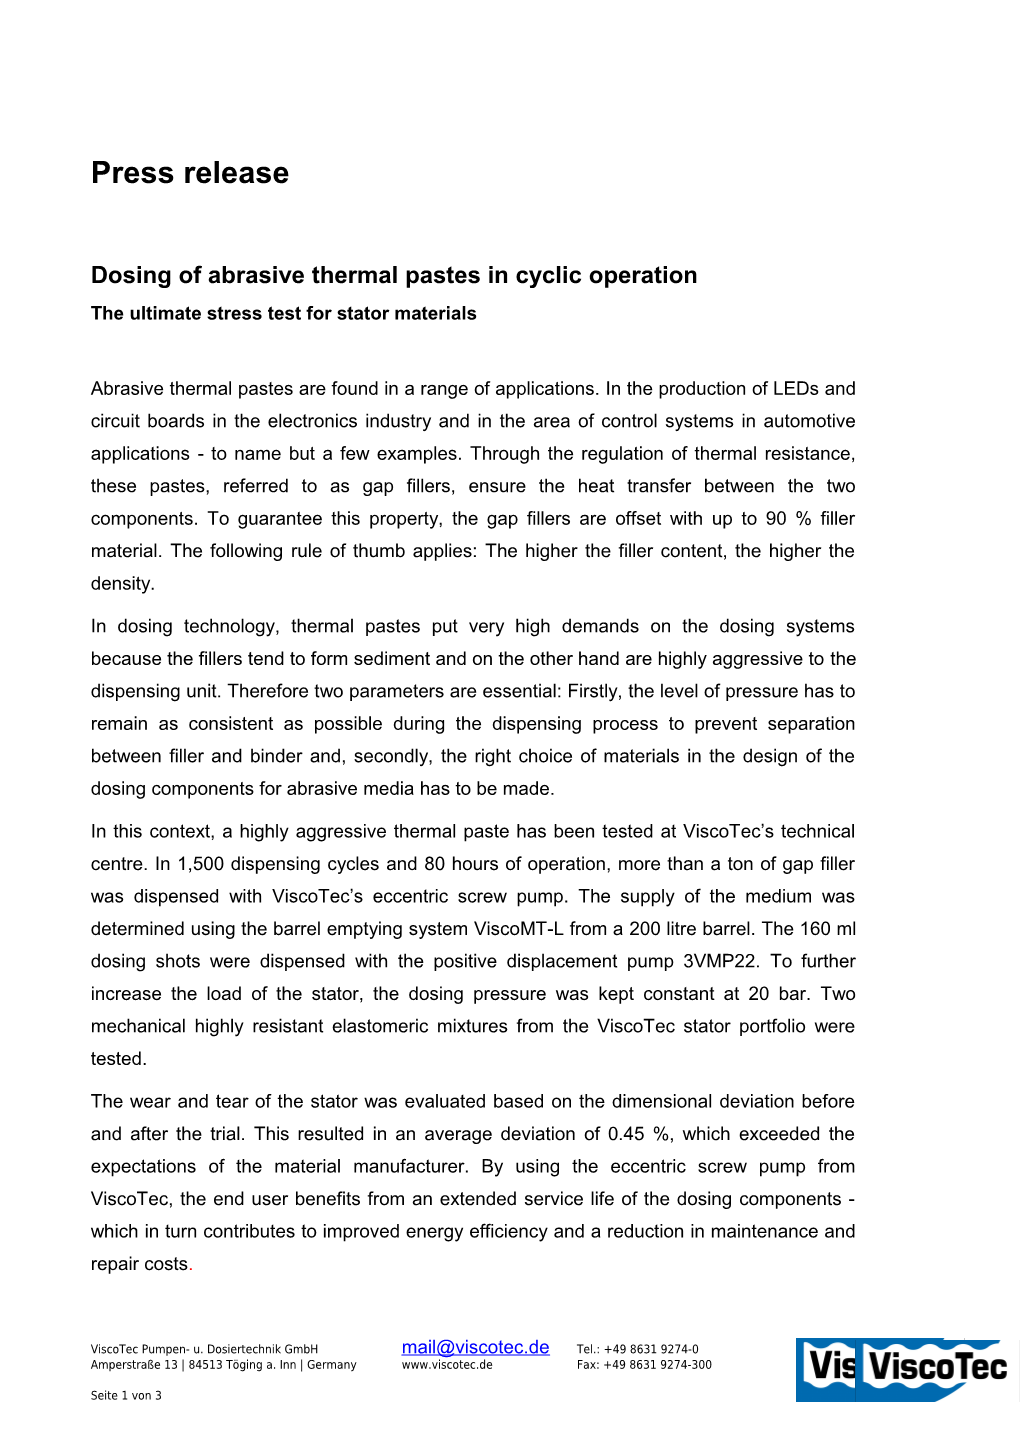 Dosing of Abrasive Thermal Pastes in Cyclic Operation